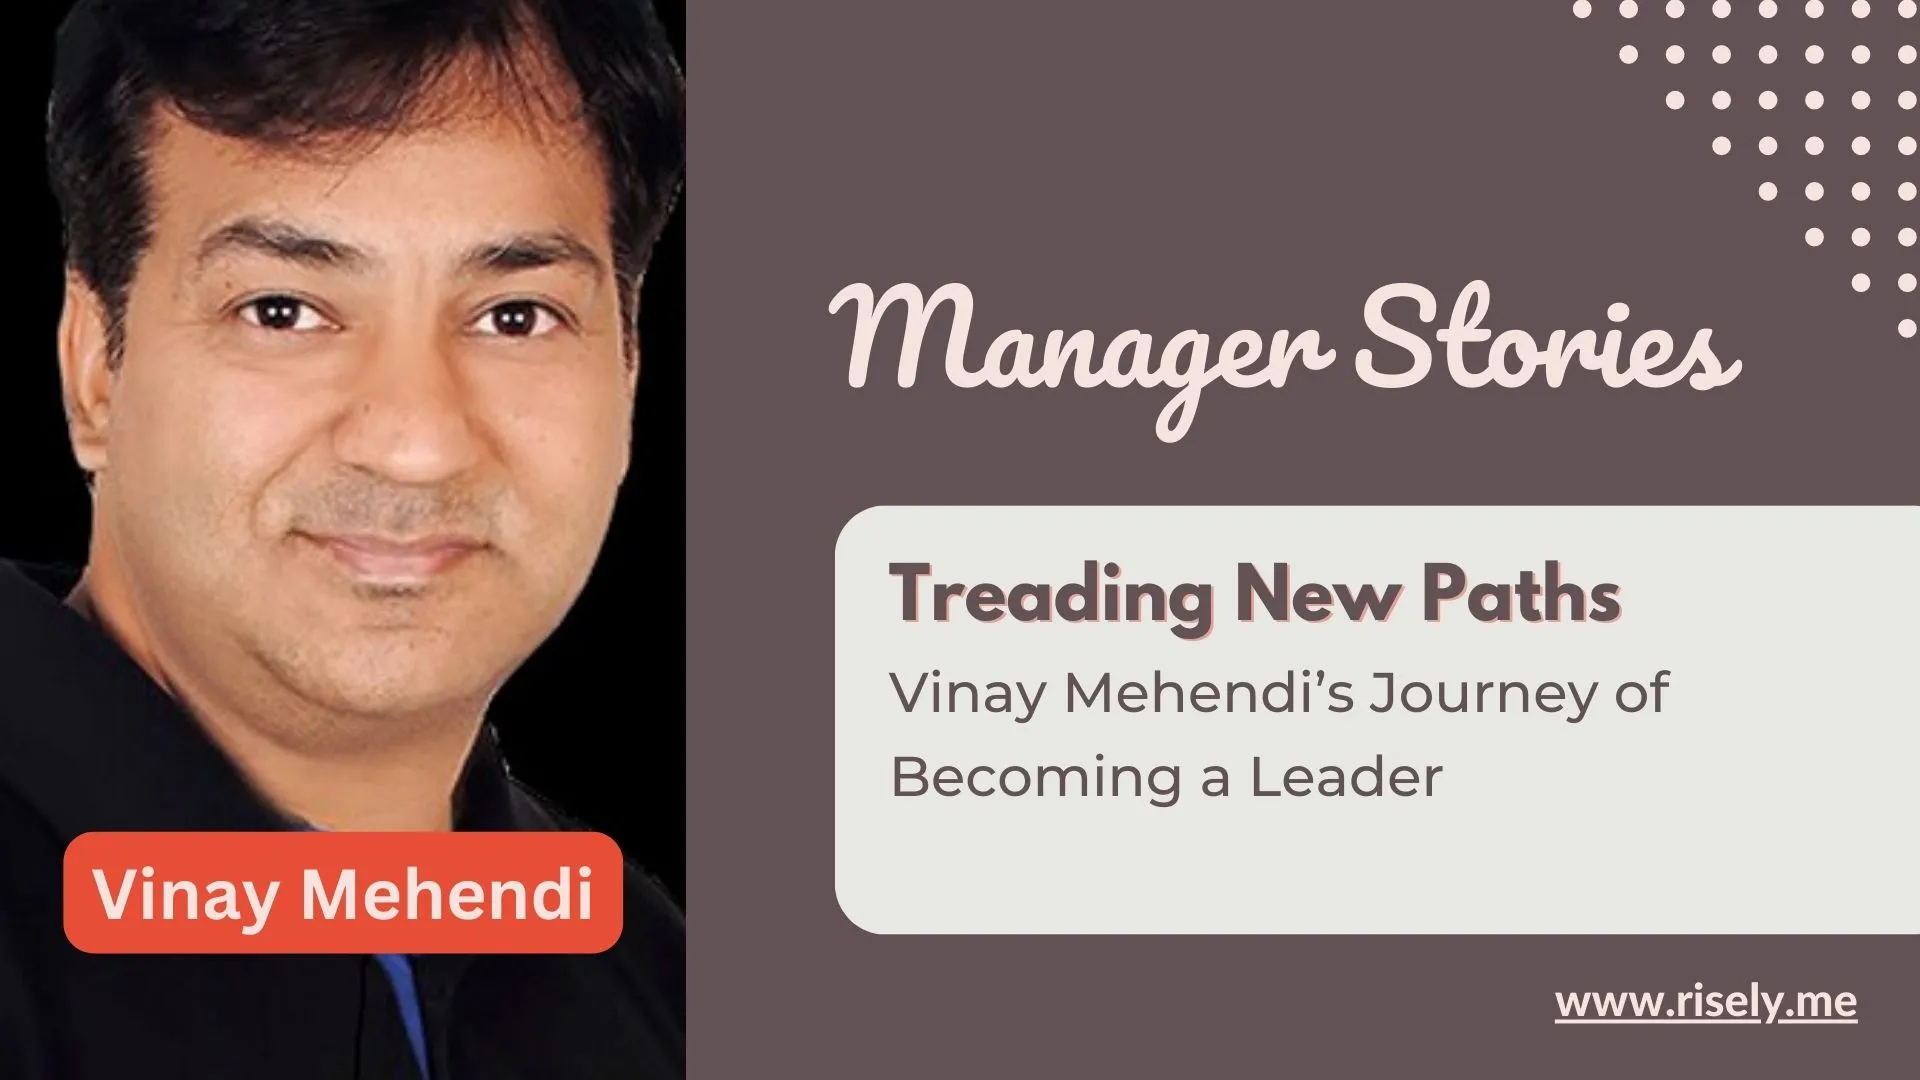 Treading New Paths Vinay Mehendi’s Journey of Becoming a Leader